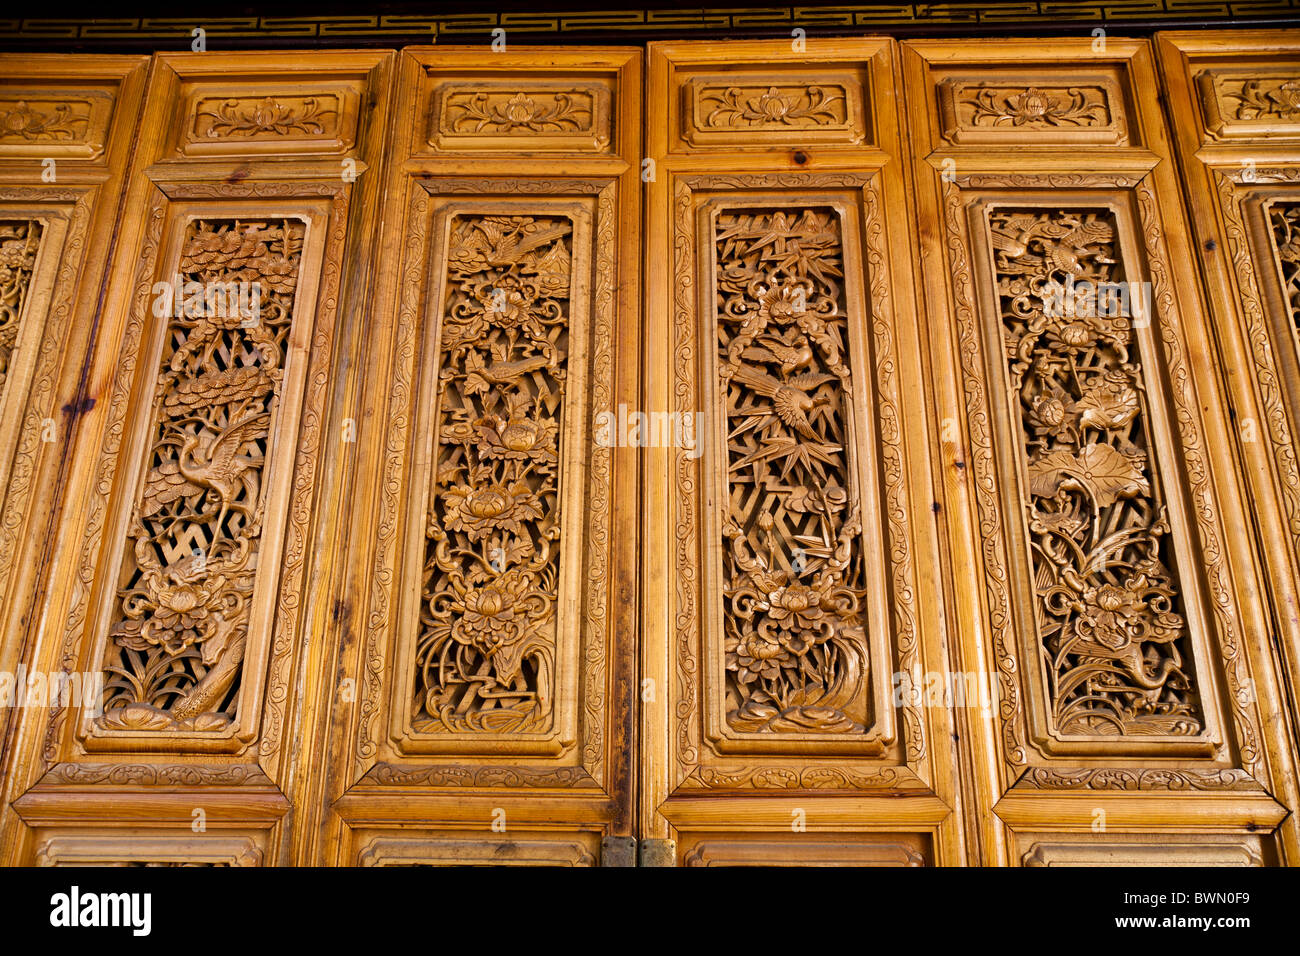 Carved wooden doors on a building in Dayan old town, Lijiang, Yunnan Province, China Stock Photo